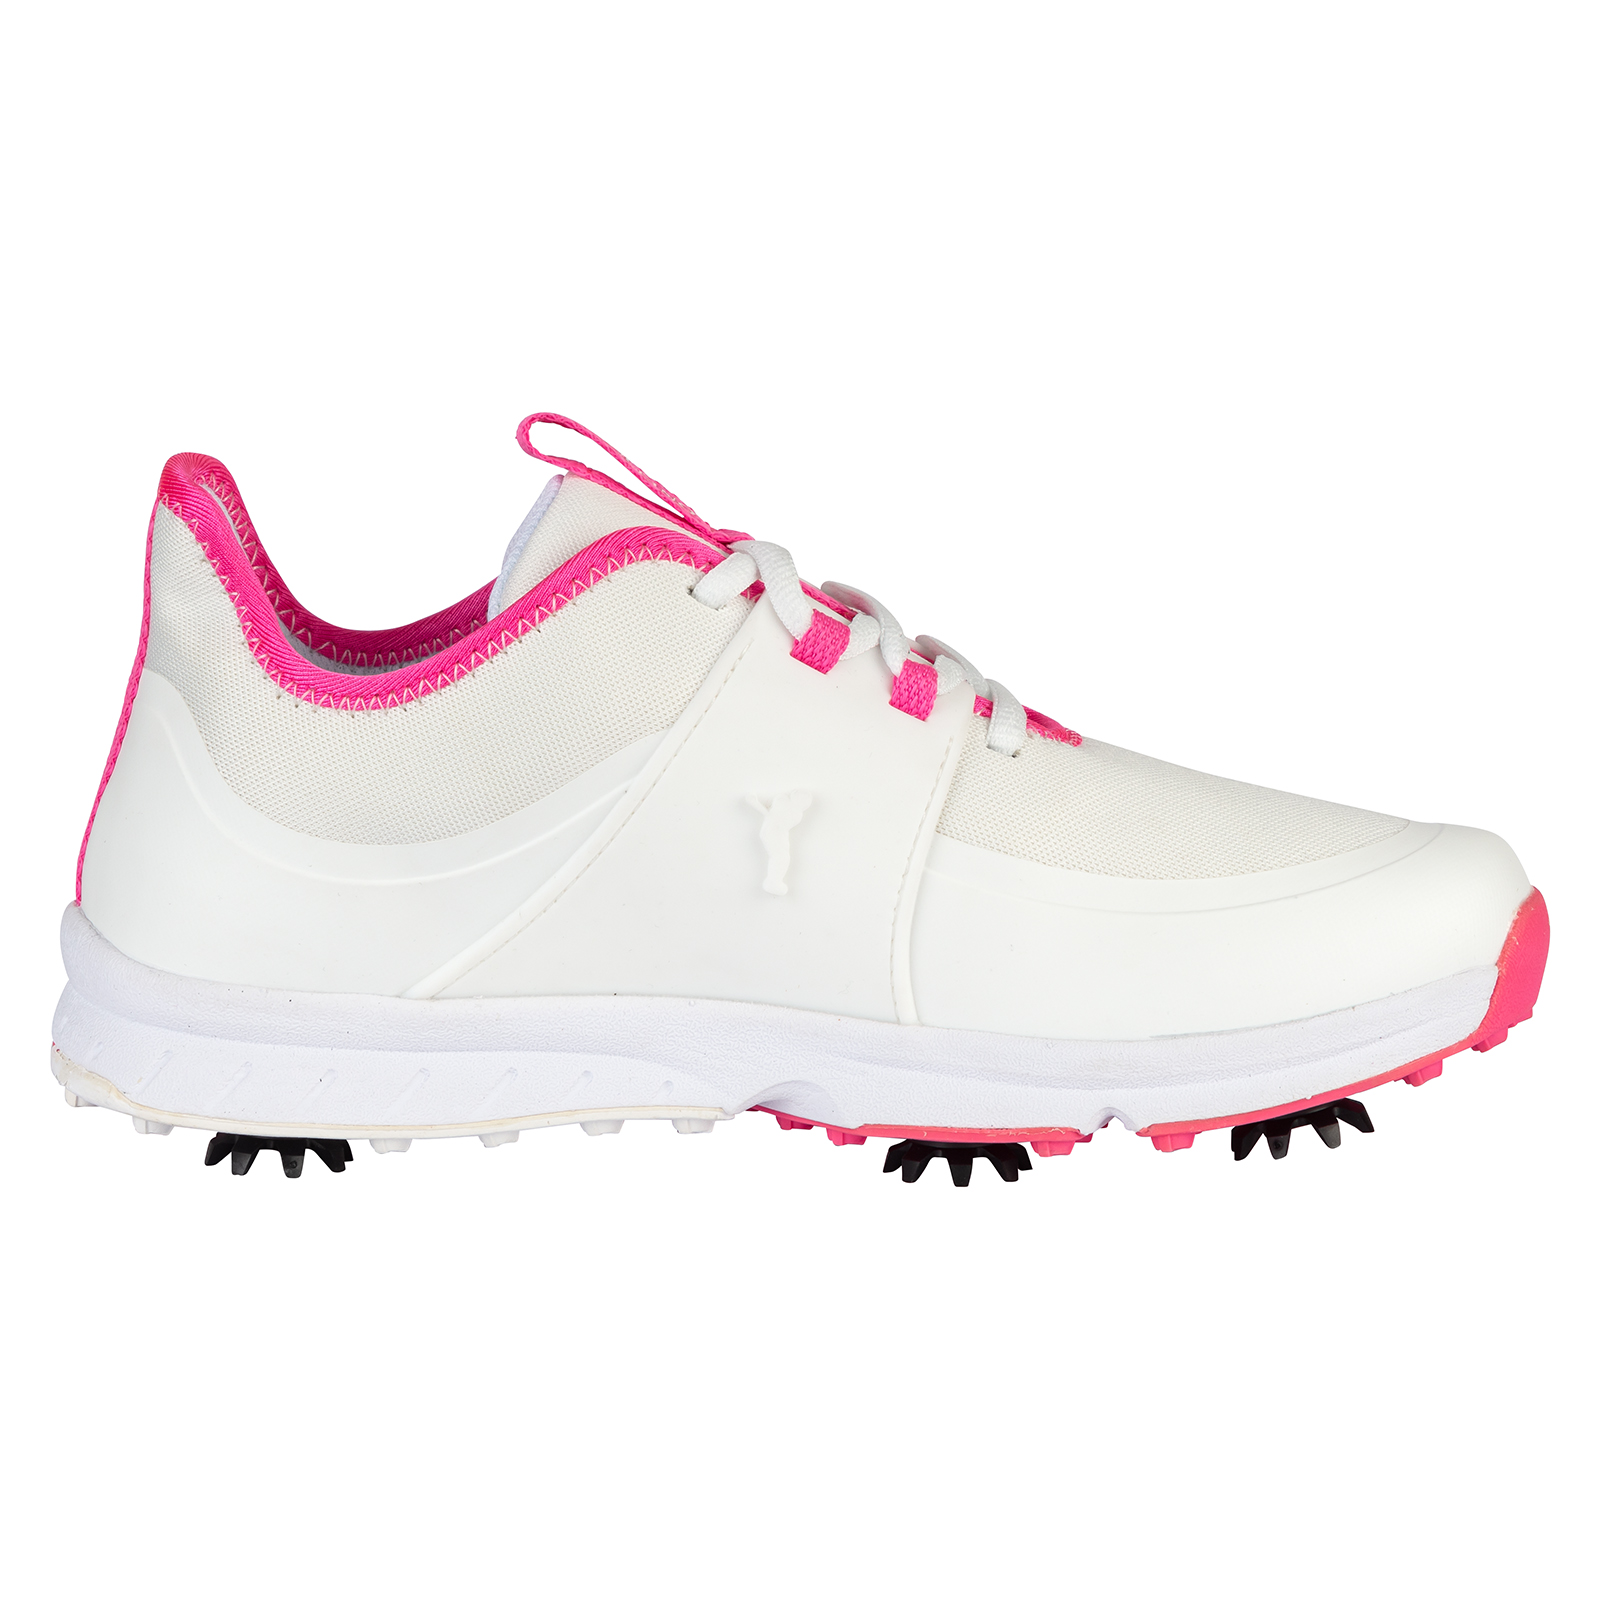 Ladies' waterproof golf shoes with removable spikes 